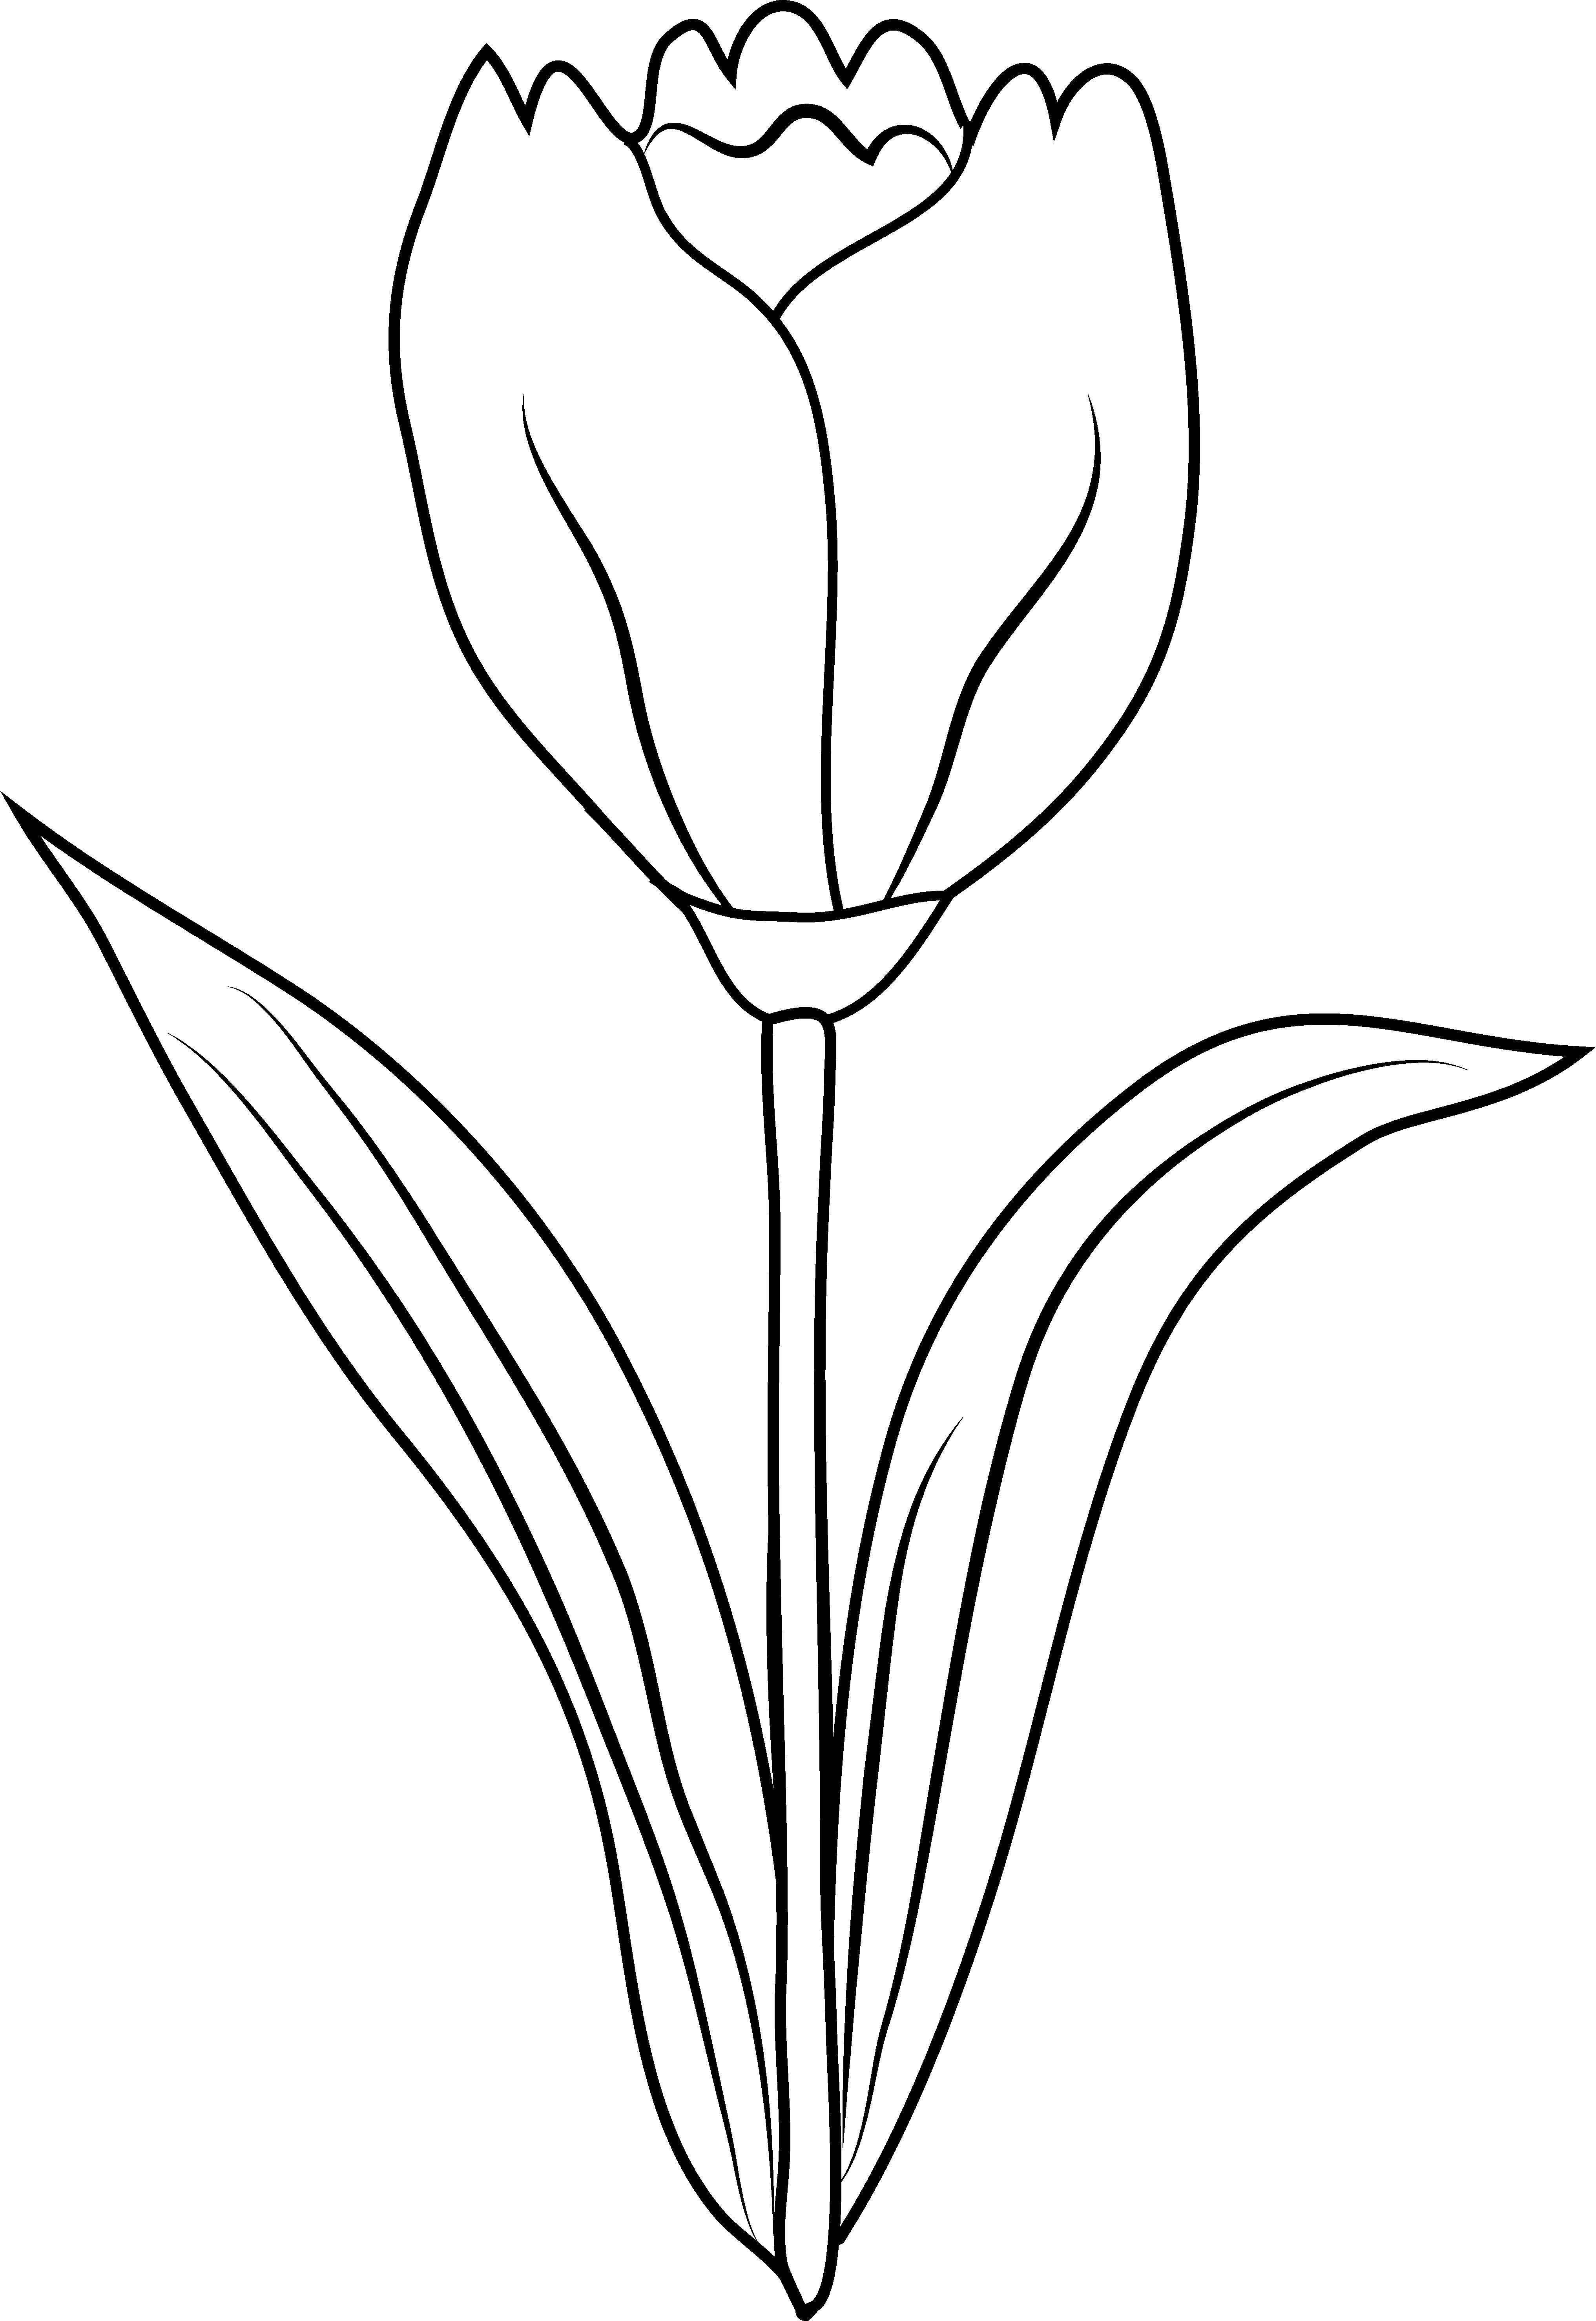 Coloring Wildflowers. Category The contours of the flower to cut. Tags:  flowers.